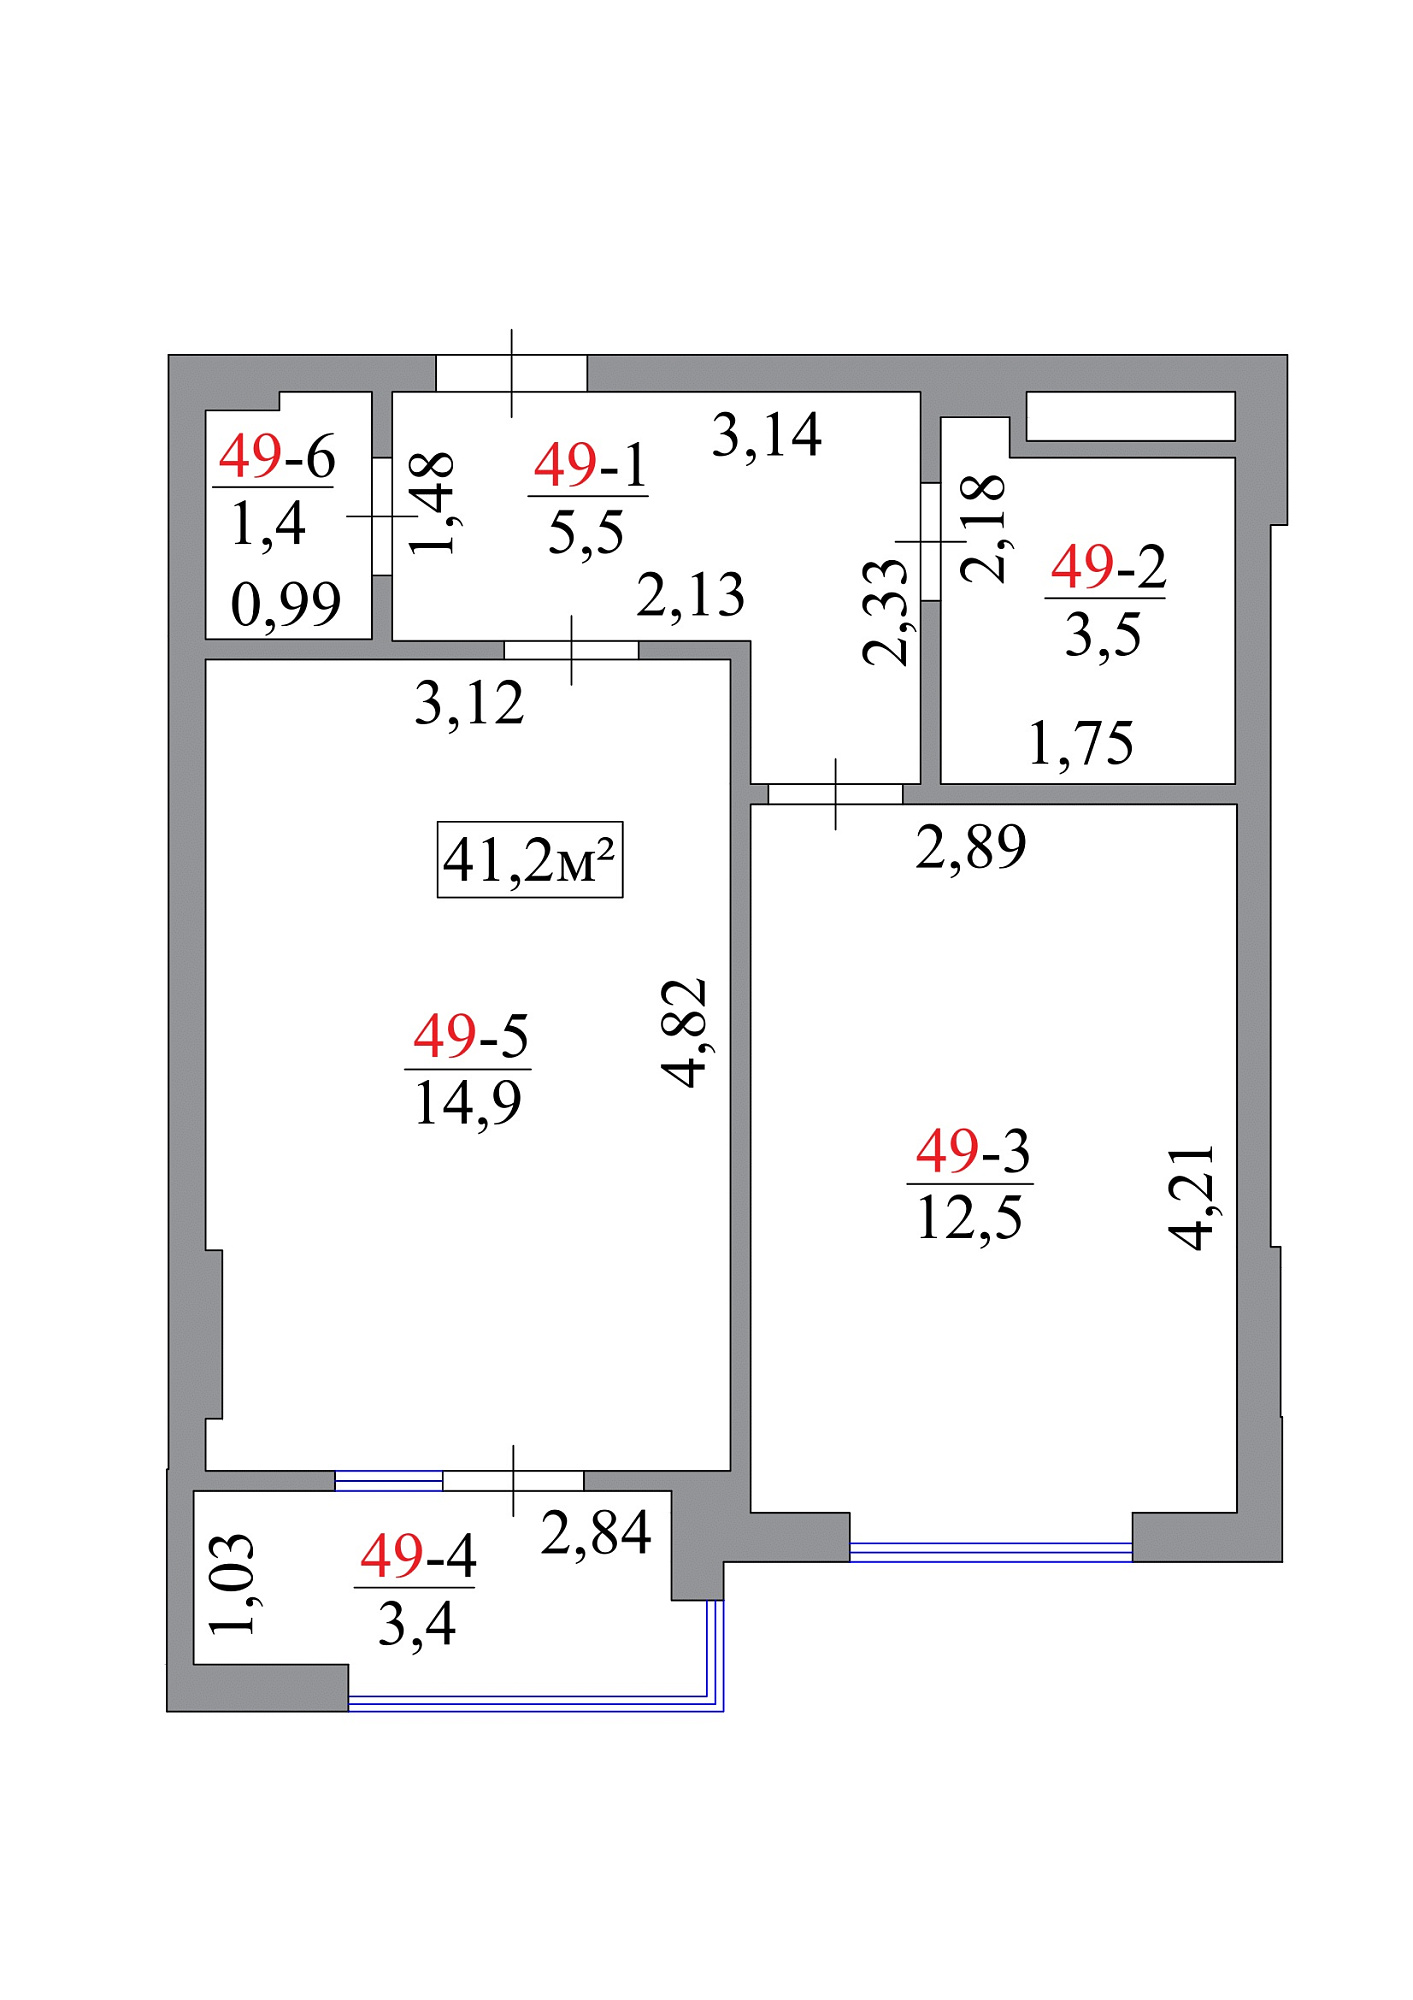 Planning 1-rm flats area 41.2m2, AB-07-05/00044.